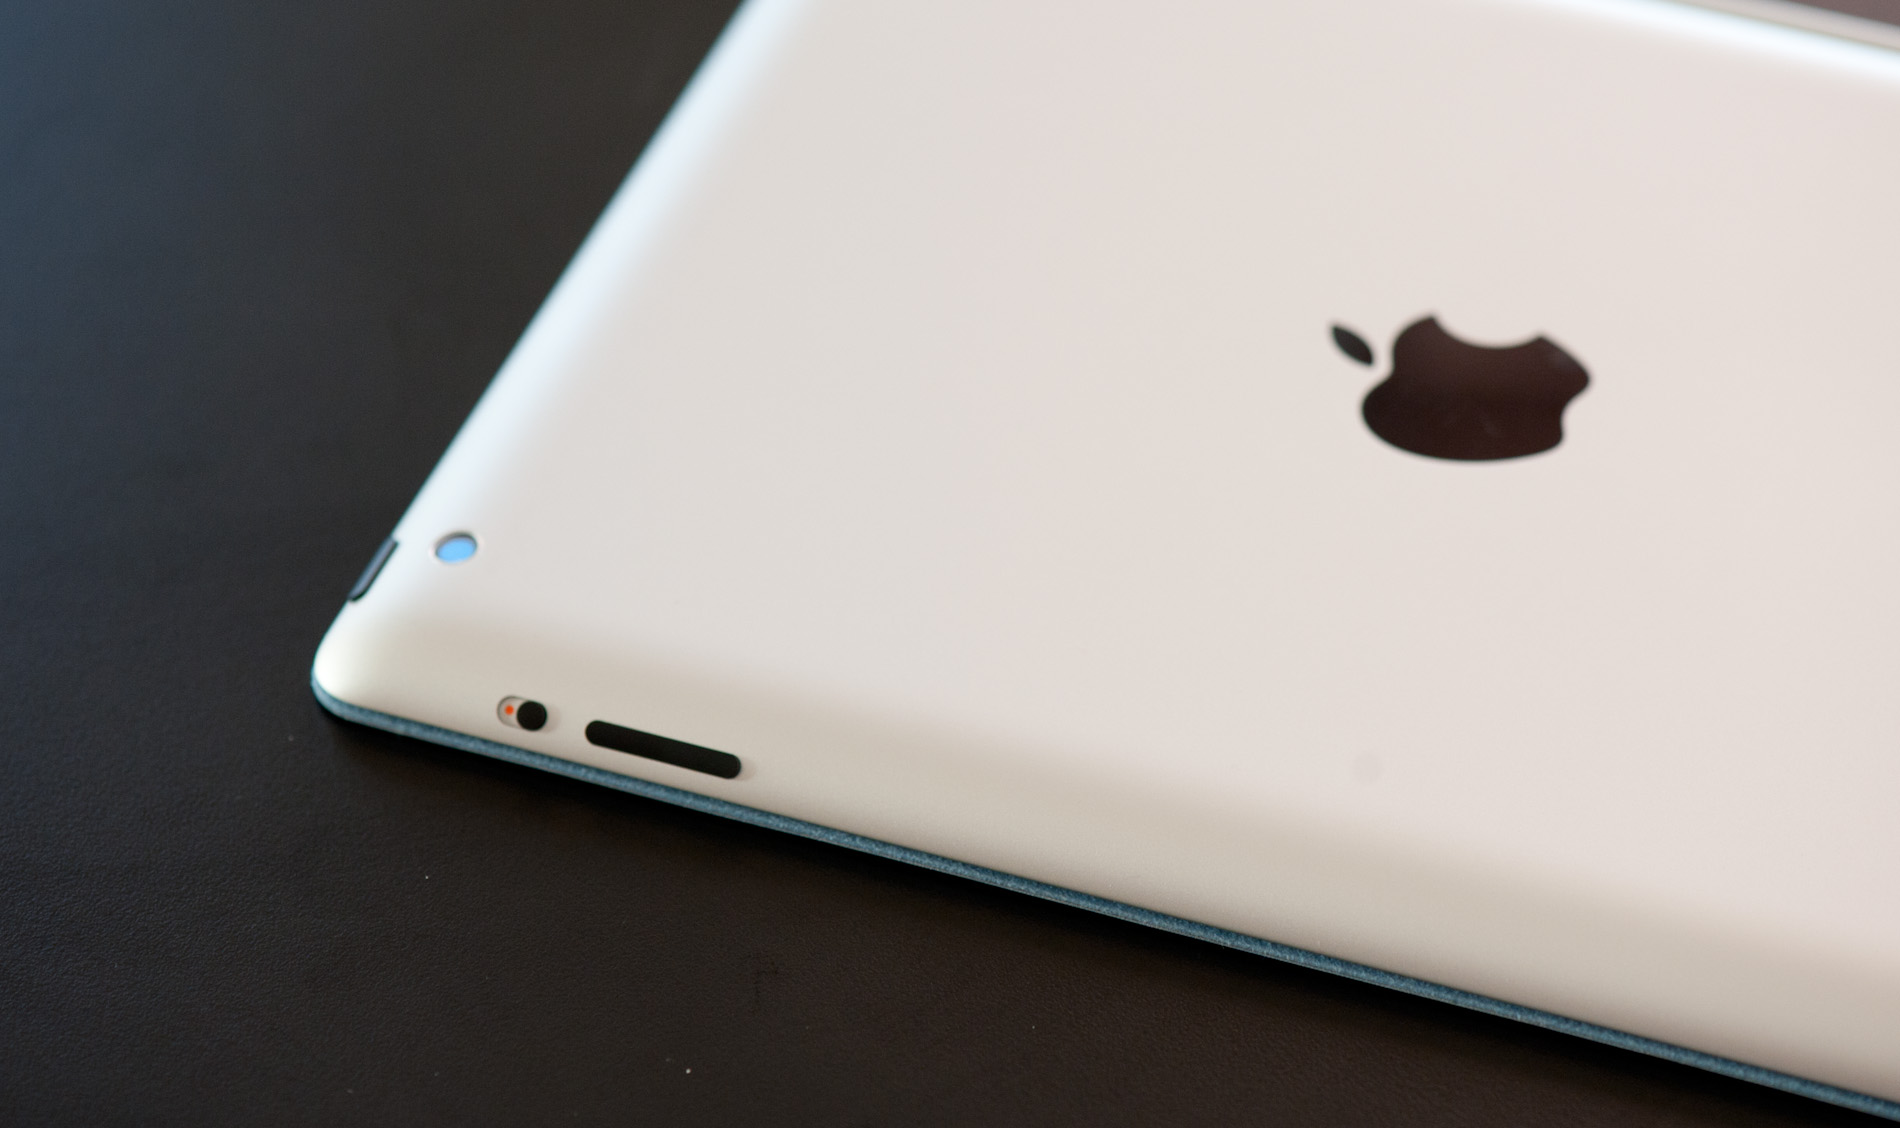 iPad 4 (Late 2012) Review